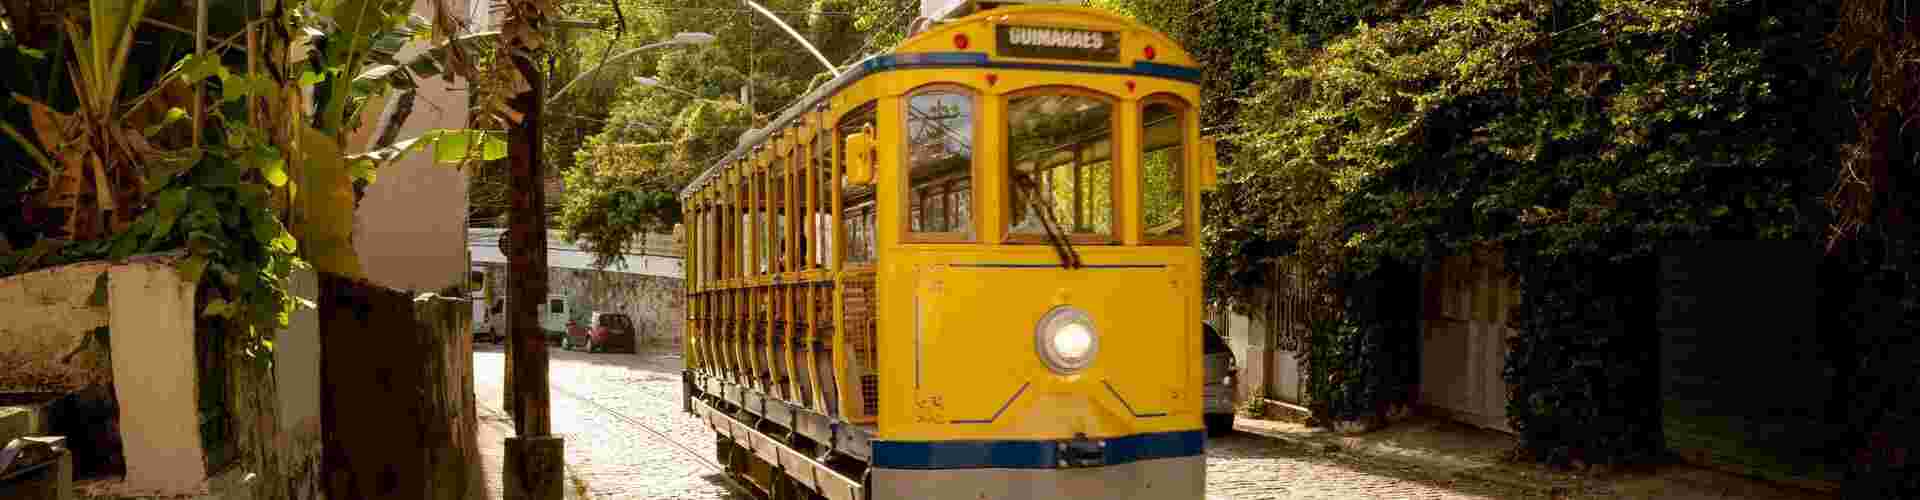 A yellow tramcar going down the street in Rio, Brazil